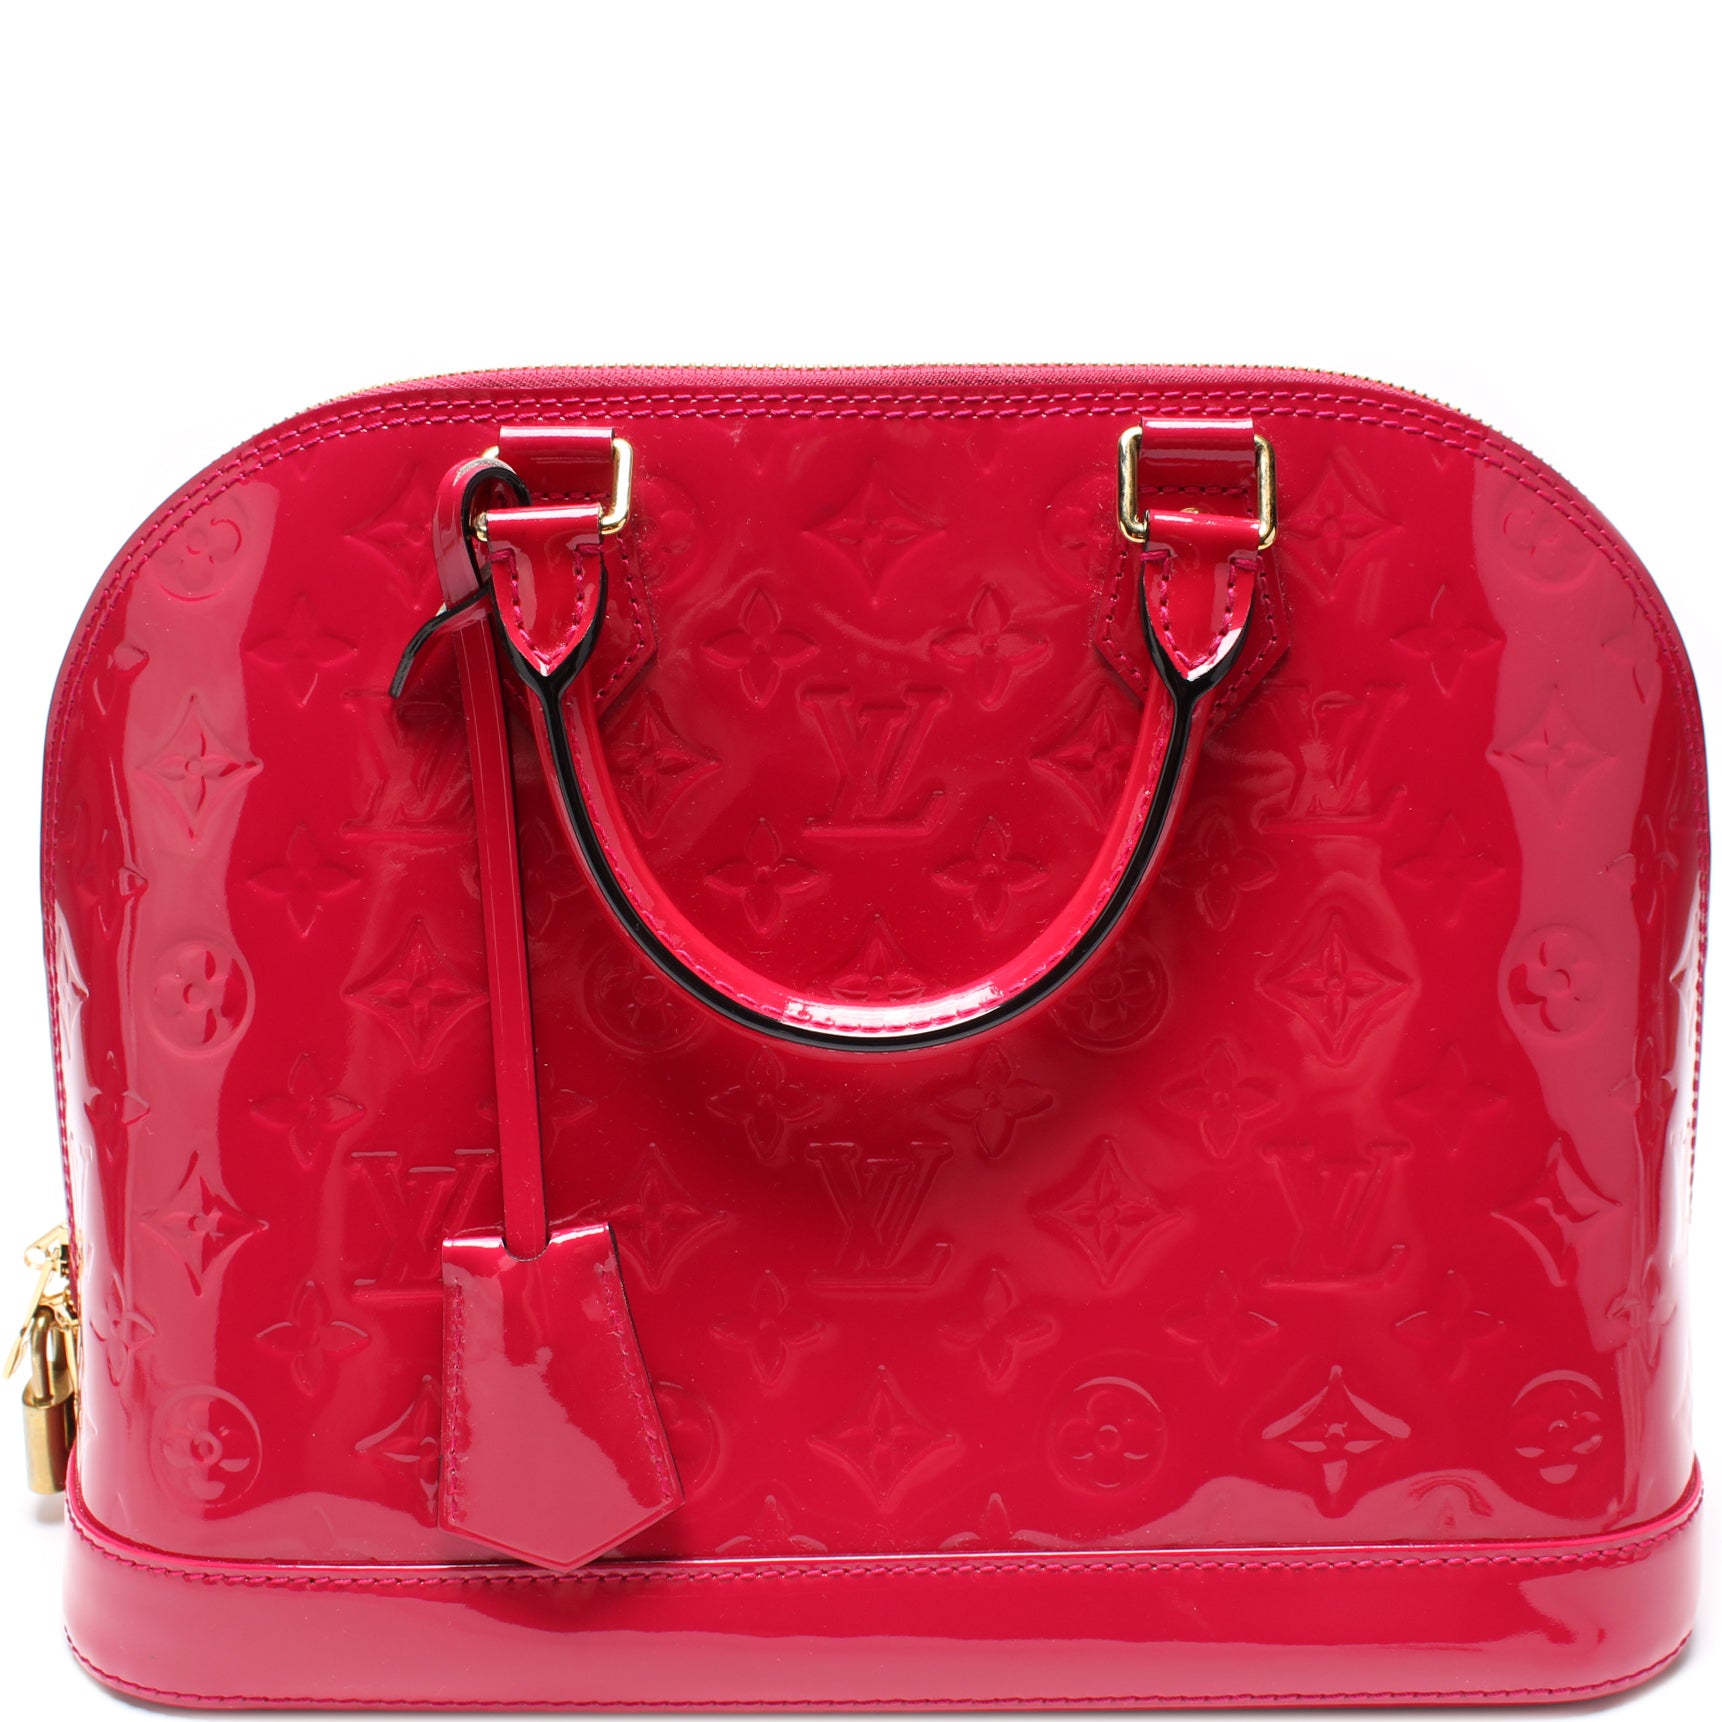 Louis Vuitton - Excellent - Alma PM in Red Patent Leather - Top Handle  Handbag